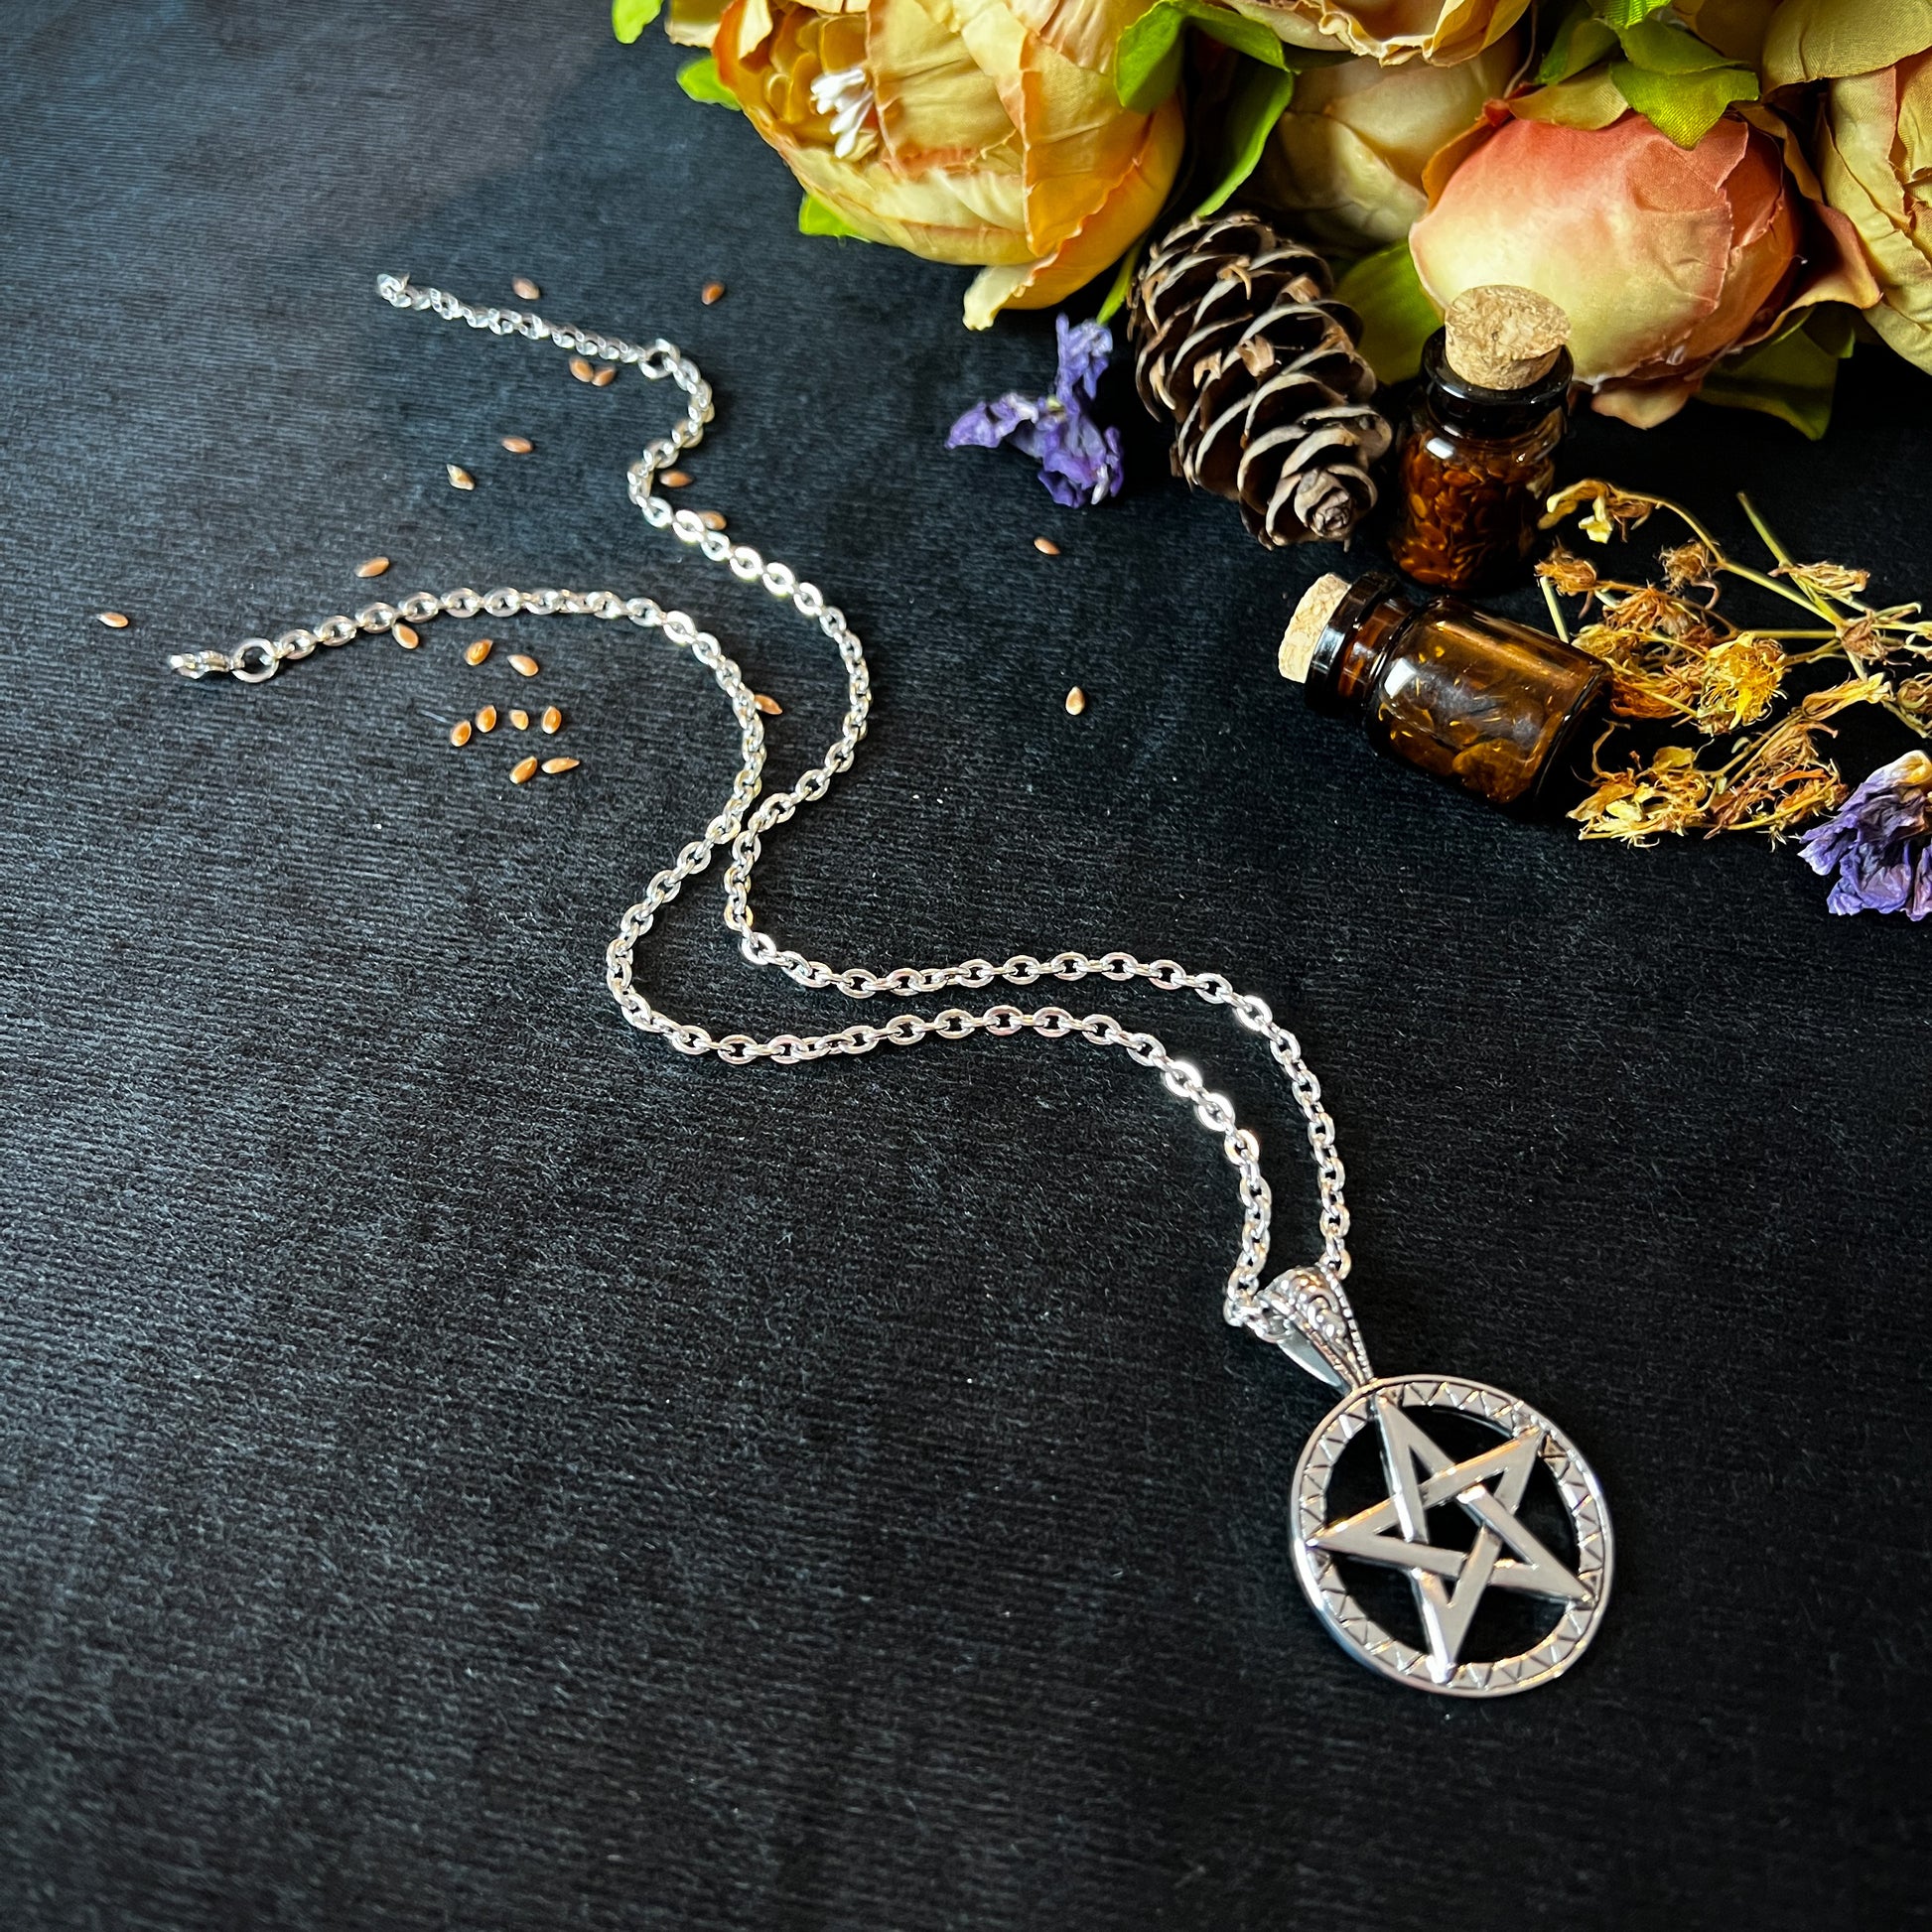 Stainless steel pentacle witch necklace Baguette Magick